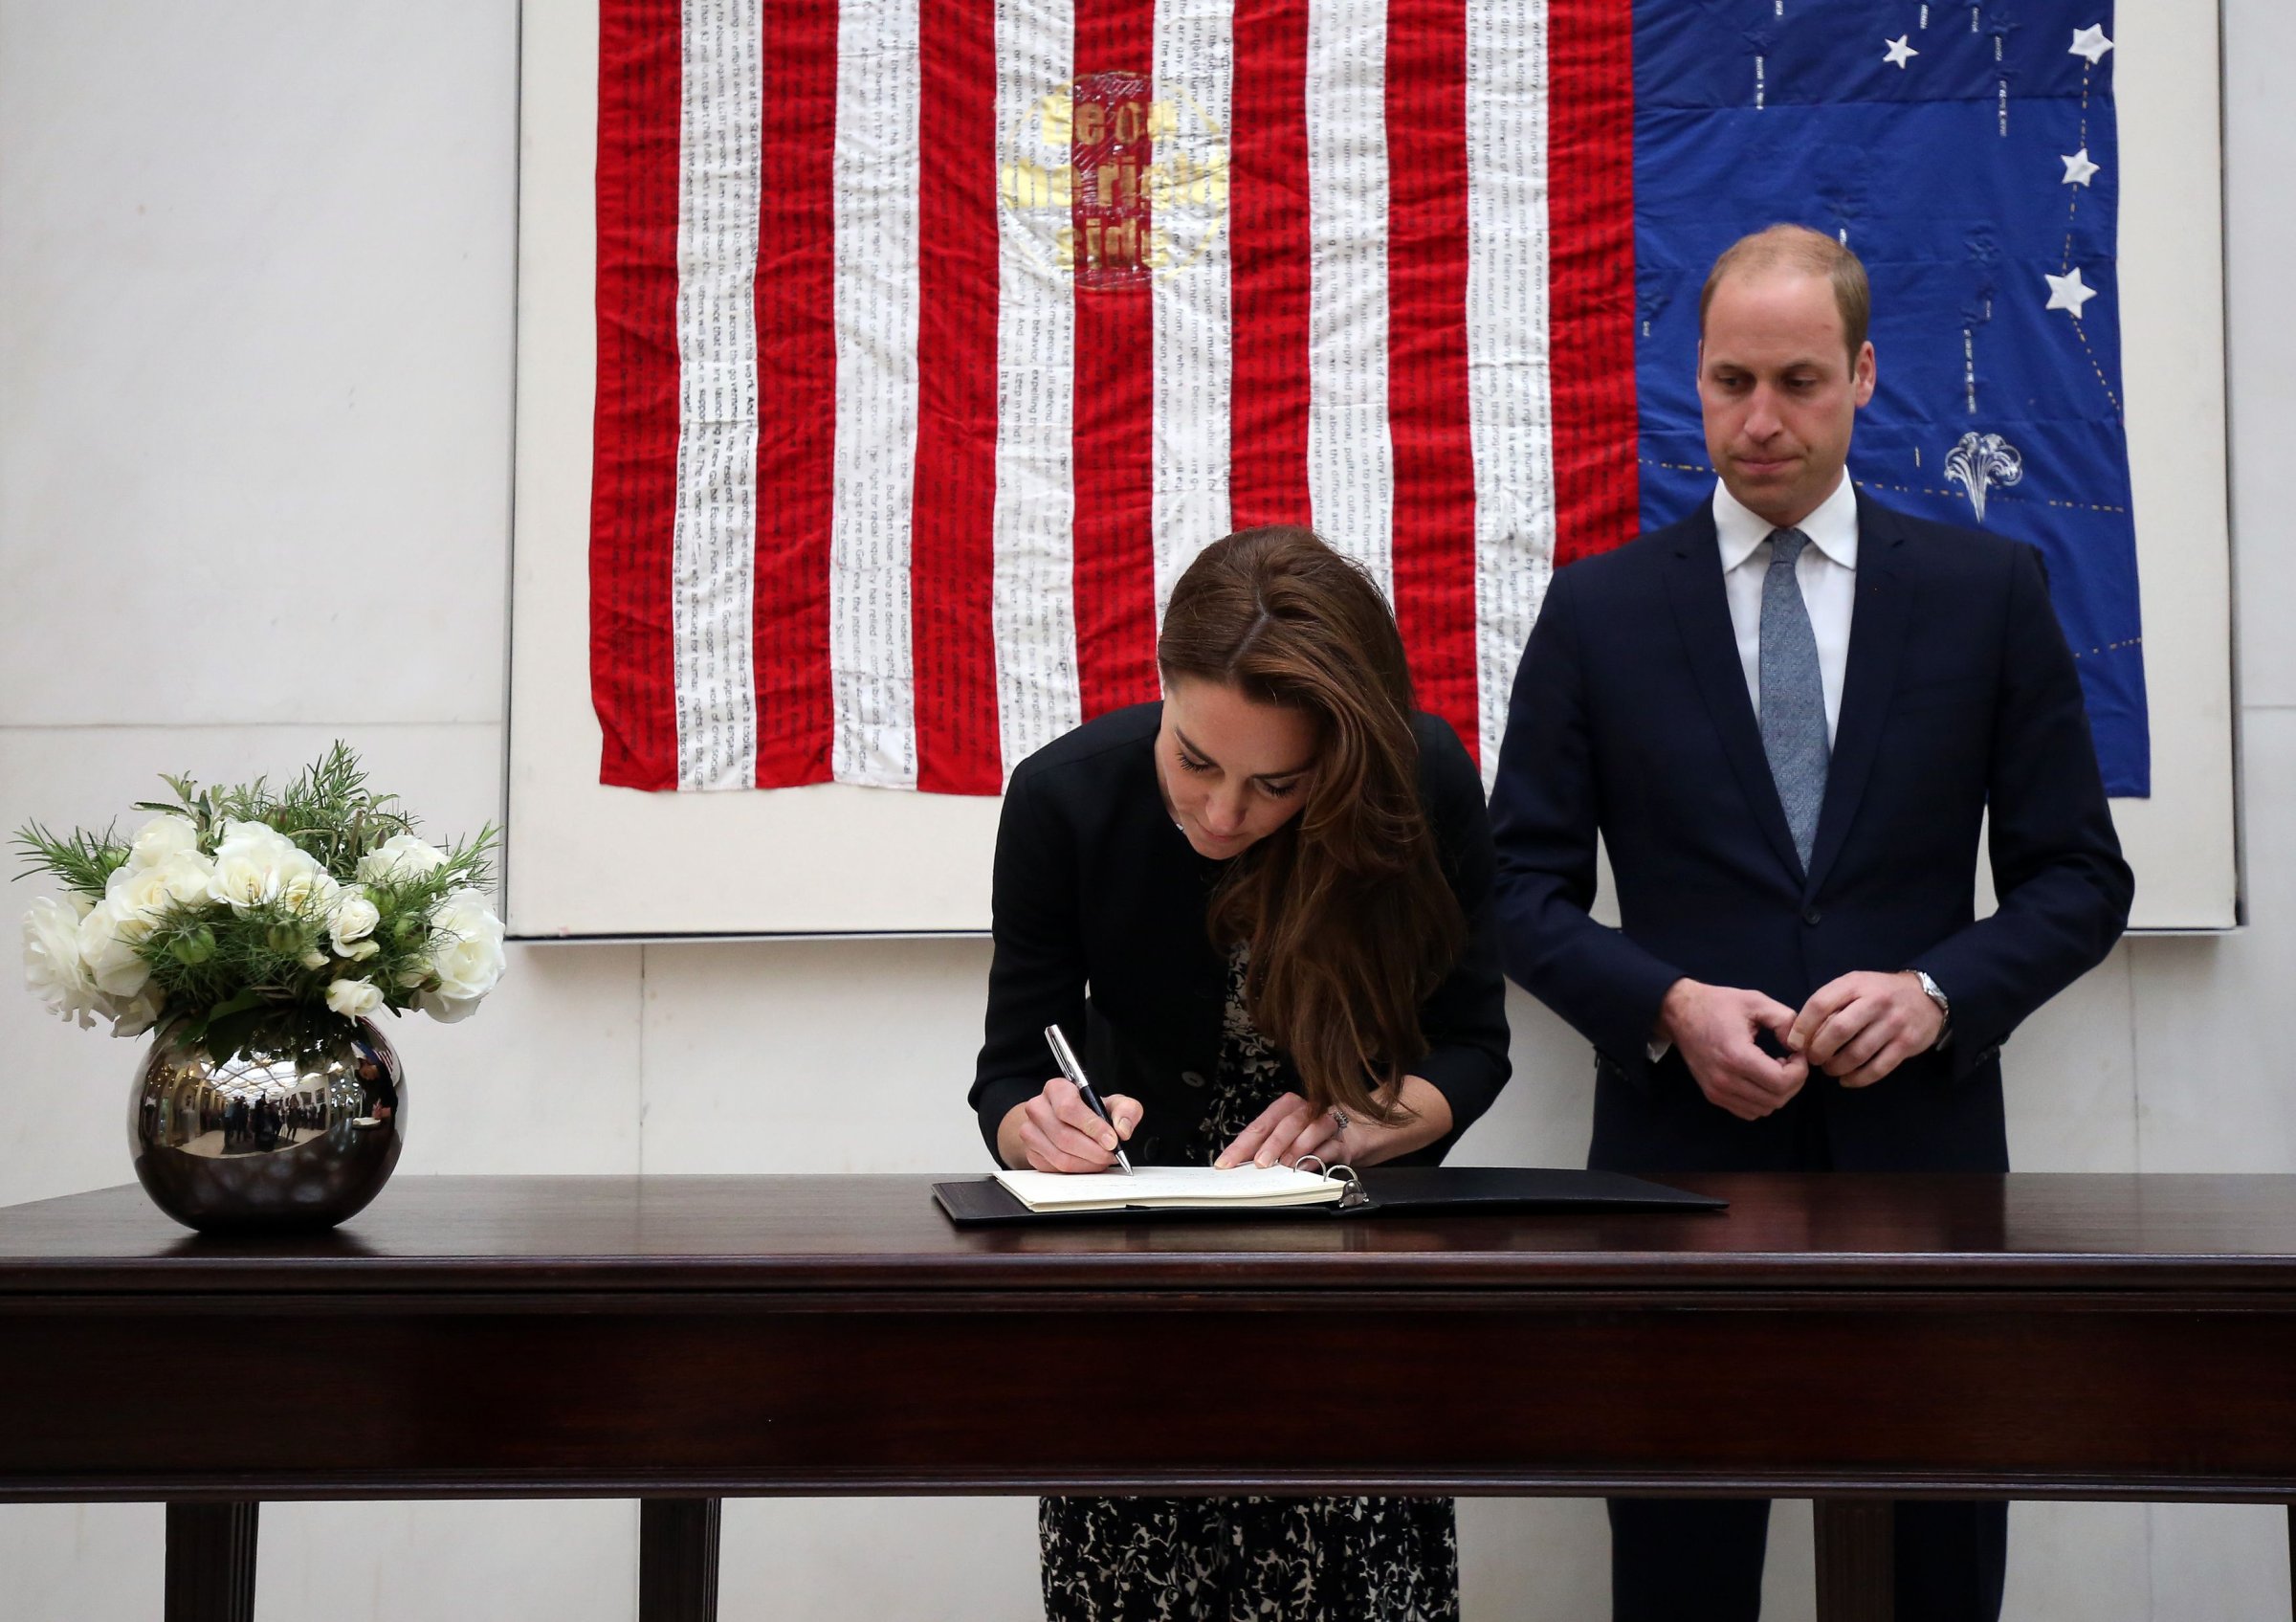 Catherine, Duchess of Cambridge signs a book of condolence for the Orlando mass shooting victims while Prince WIlliam, The Duke of Cambridge looks on at the US Embassy on June 14, 2016 in London, England.